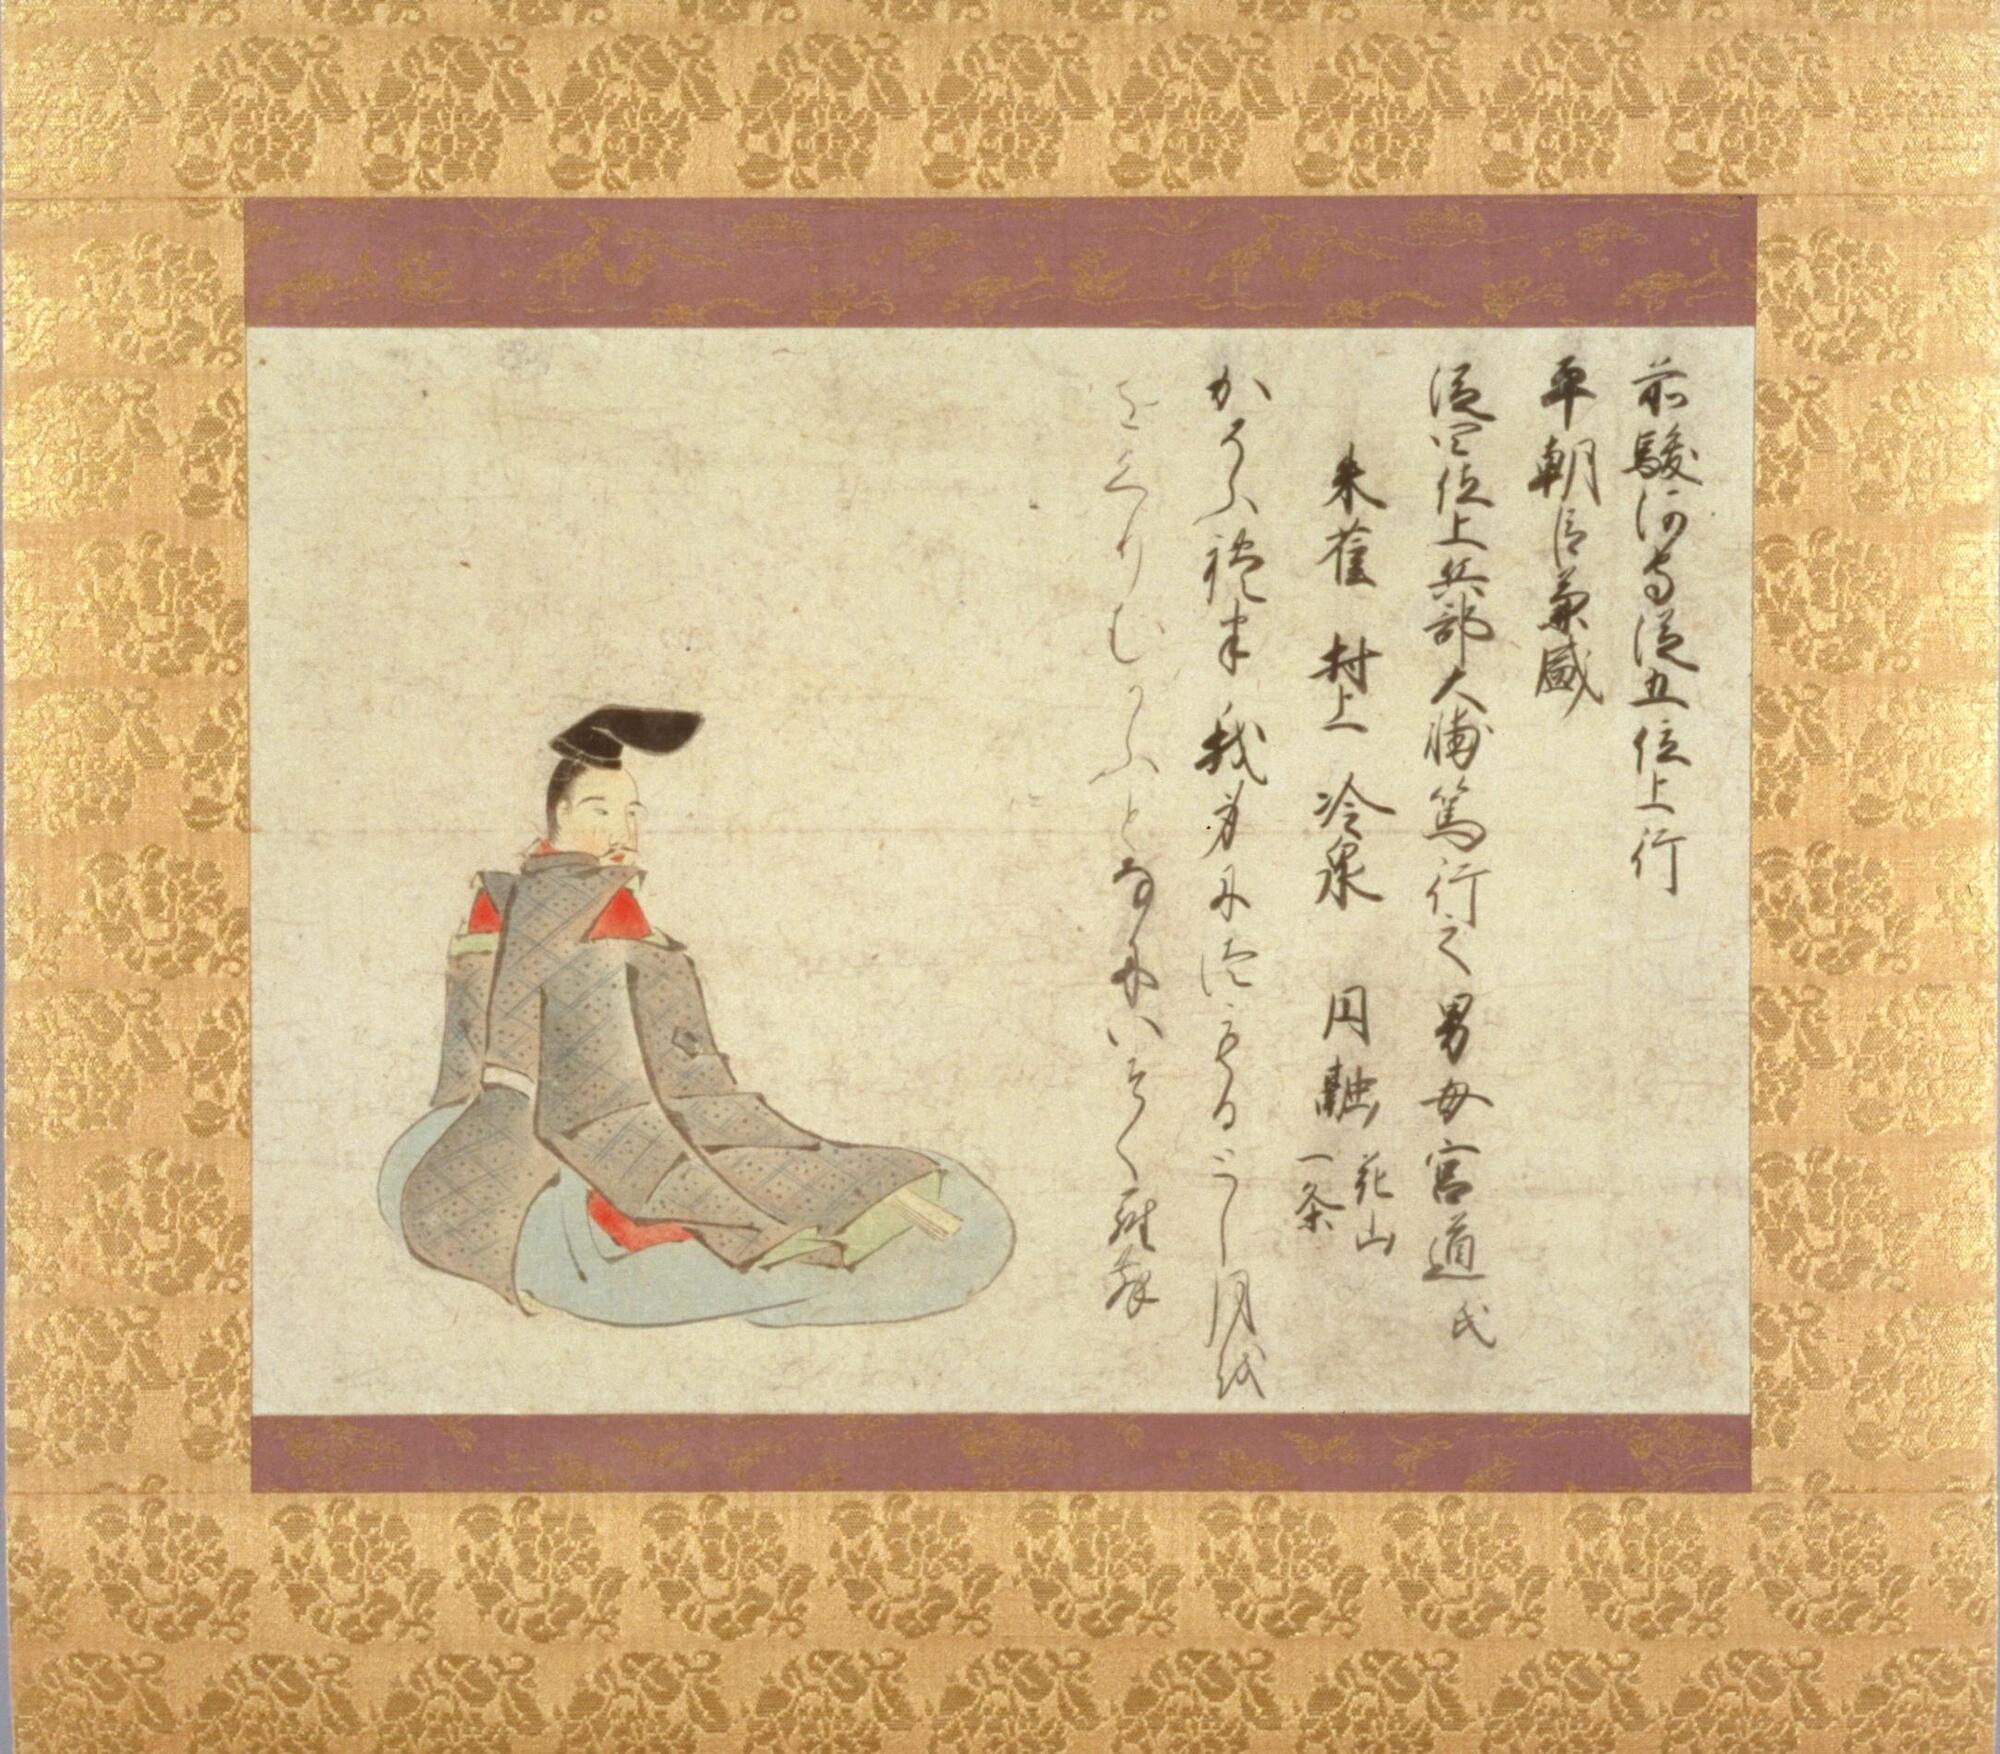 A male figure is sitting sideways, his face looking toward the front right. He wears a long black cap, a red under-kimono, a grayish-color jacket with geometric patterns, and right gray color pantaloons. He holds a fan, which is peeking from the right sleeve. The painting is accompanied by calligraphy on the right side of the figure. The painting is mounted on gold brocade with strips of purple and gold brocade on top and bottom of the painting.